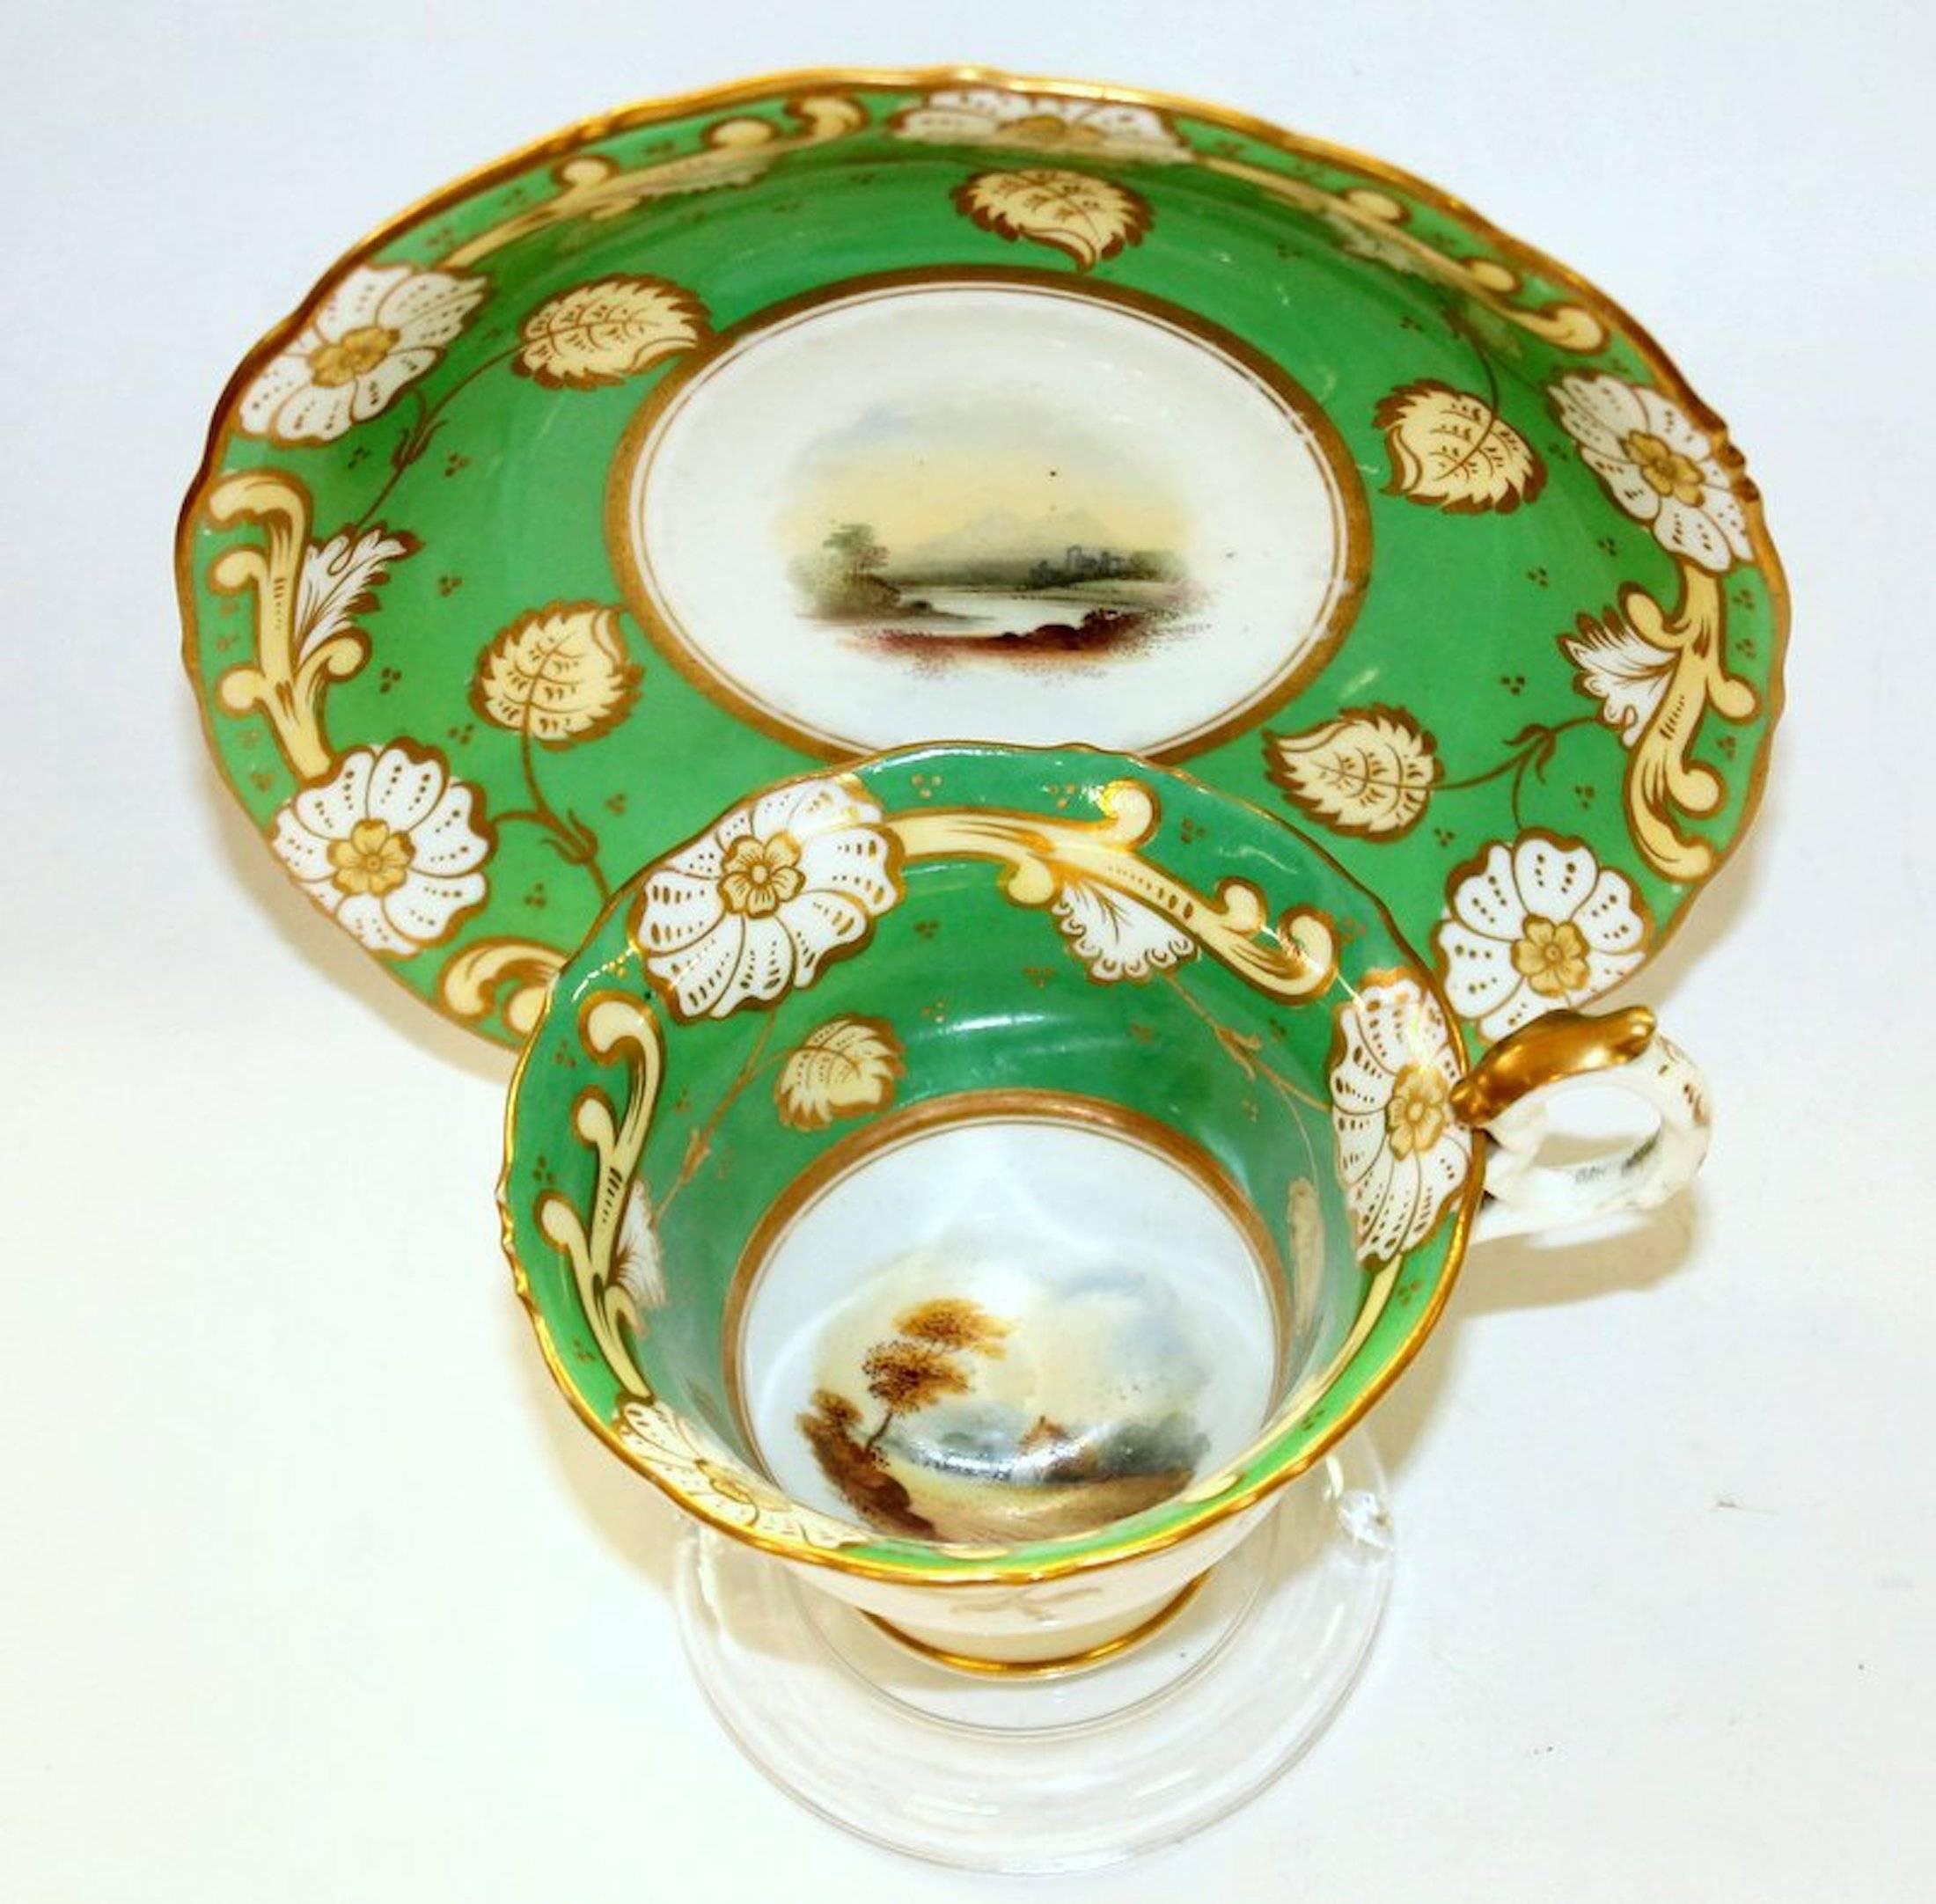 Superb antique English Samuel Alcock hand-painted porcelain scenic cup and saucer.

Please note finely hand-painted pastoral scenes as well as the brightly gilt designs overall.

Shape as illustrated in Berthouds 